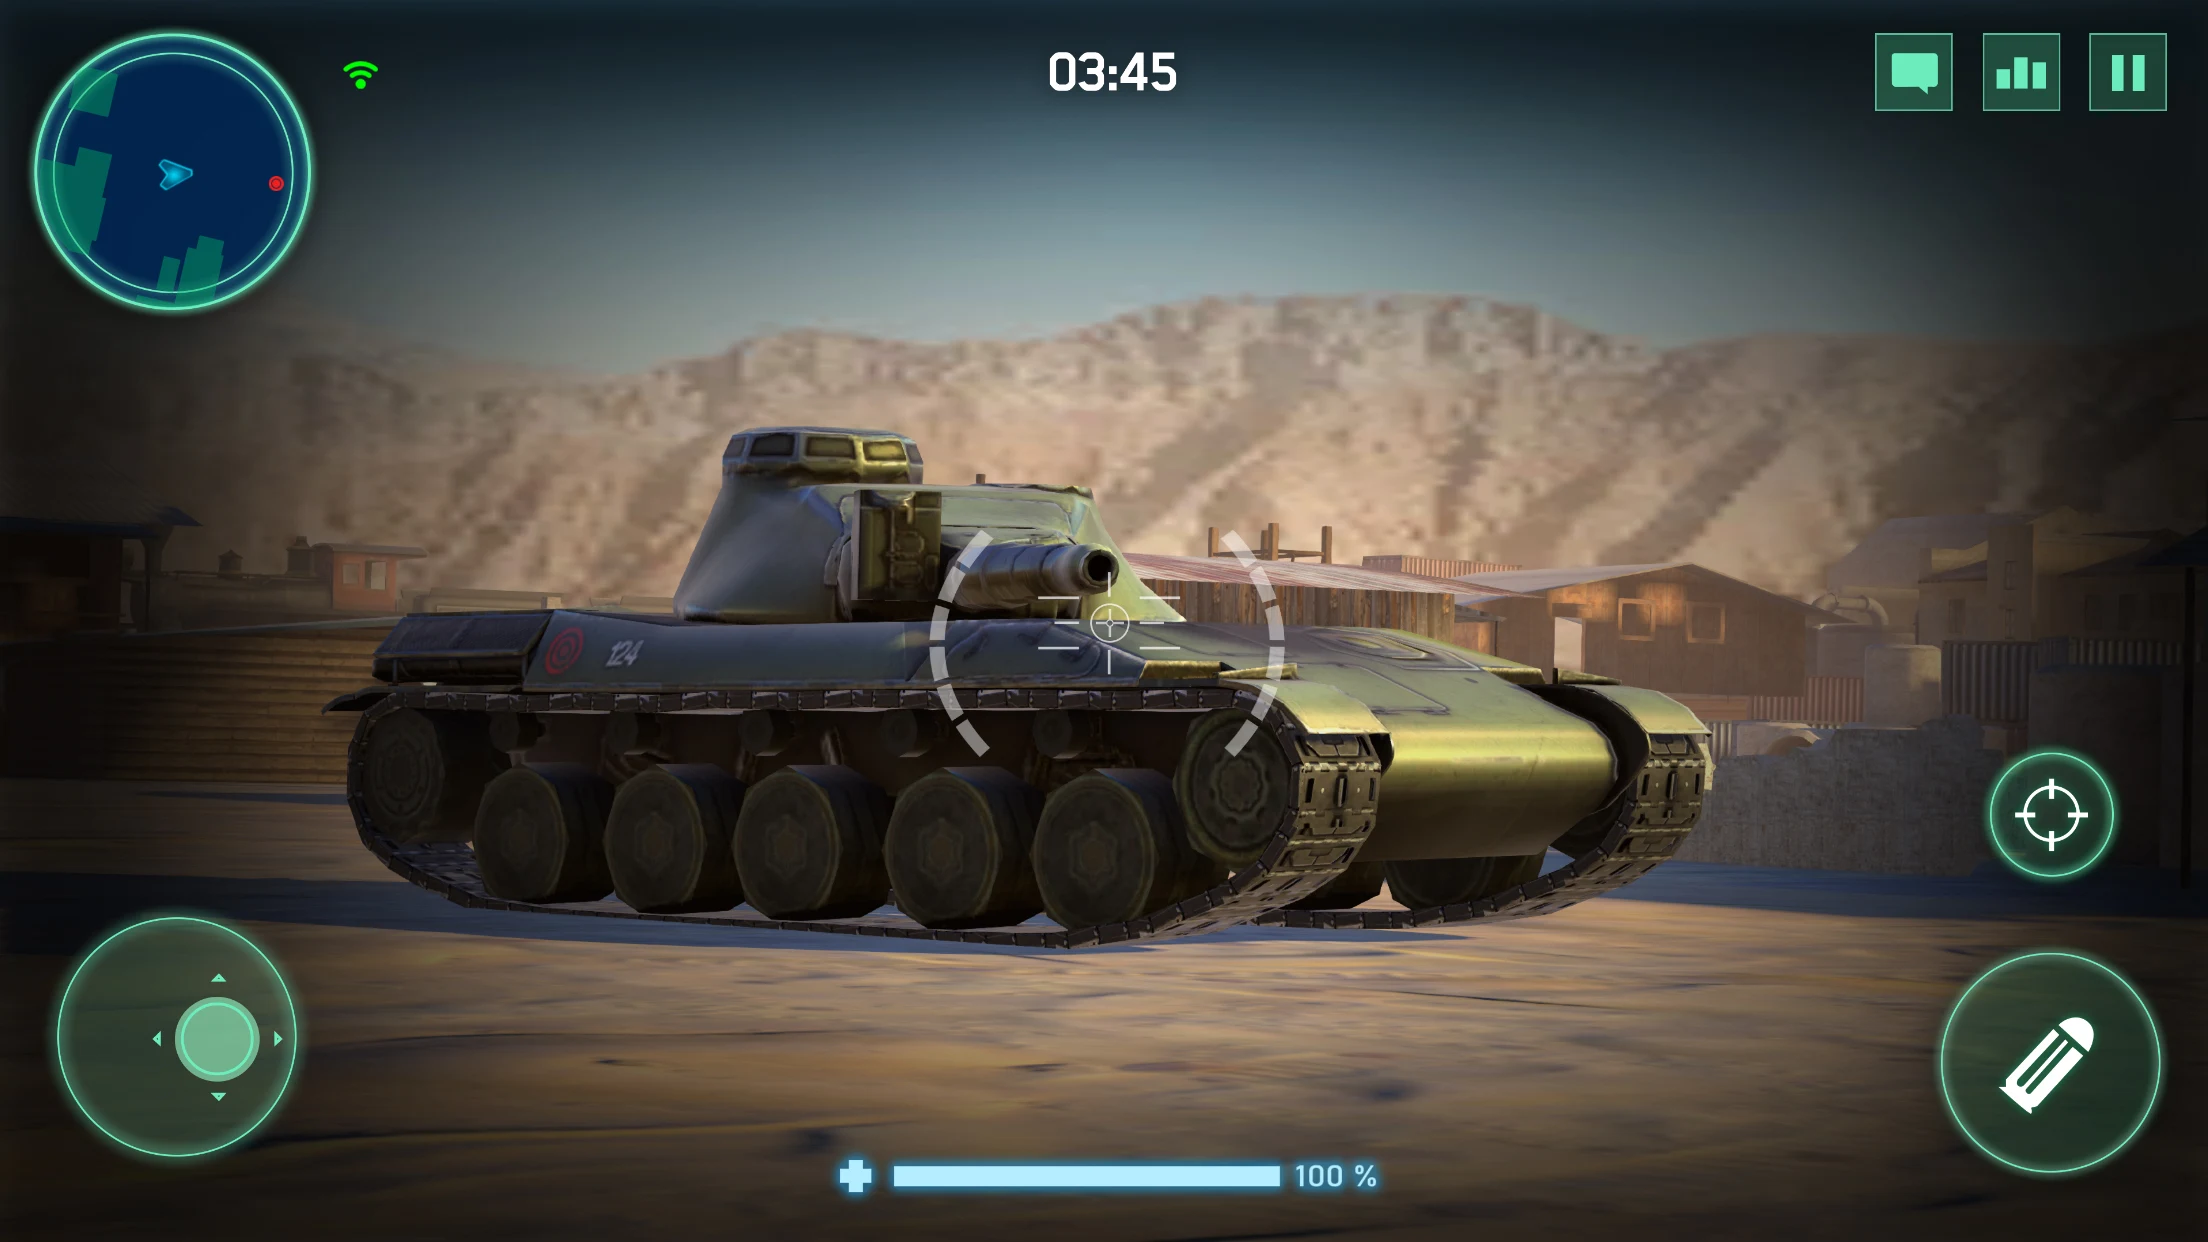 Use the Unlimited money feature to upgrade tanks